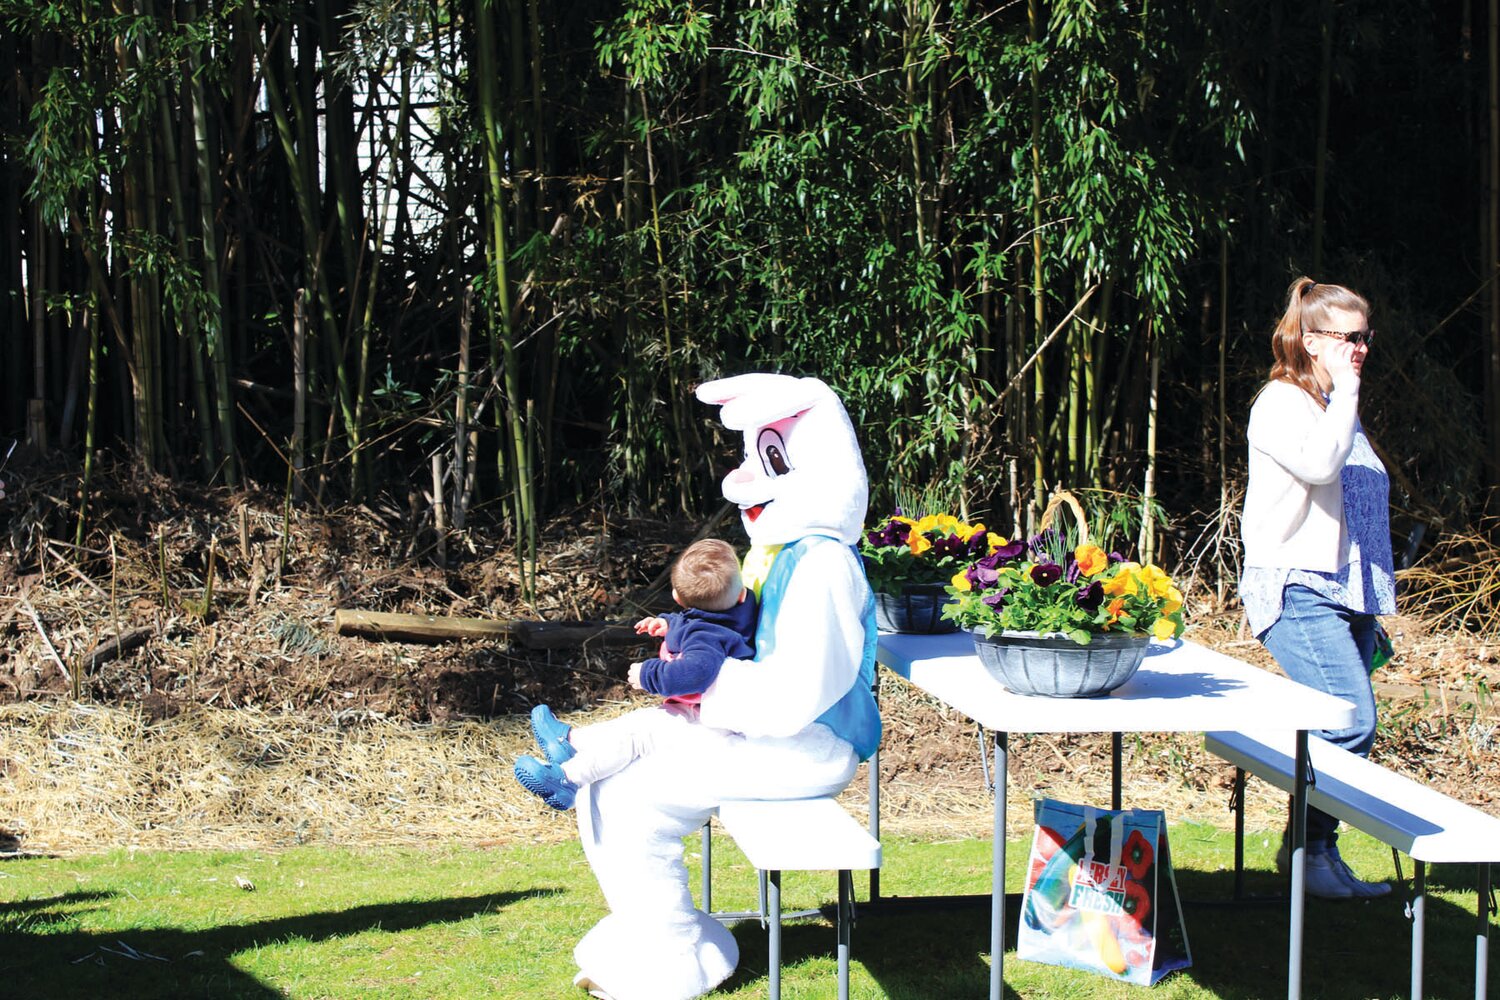 The Easter Bunny had a cameo at the  the annual egg hunt organized by veterans organizations in Lambertville.